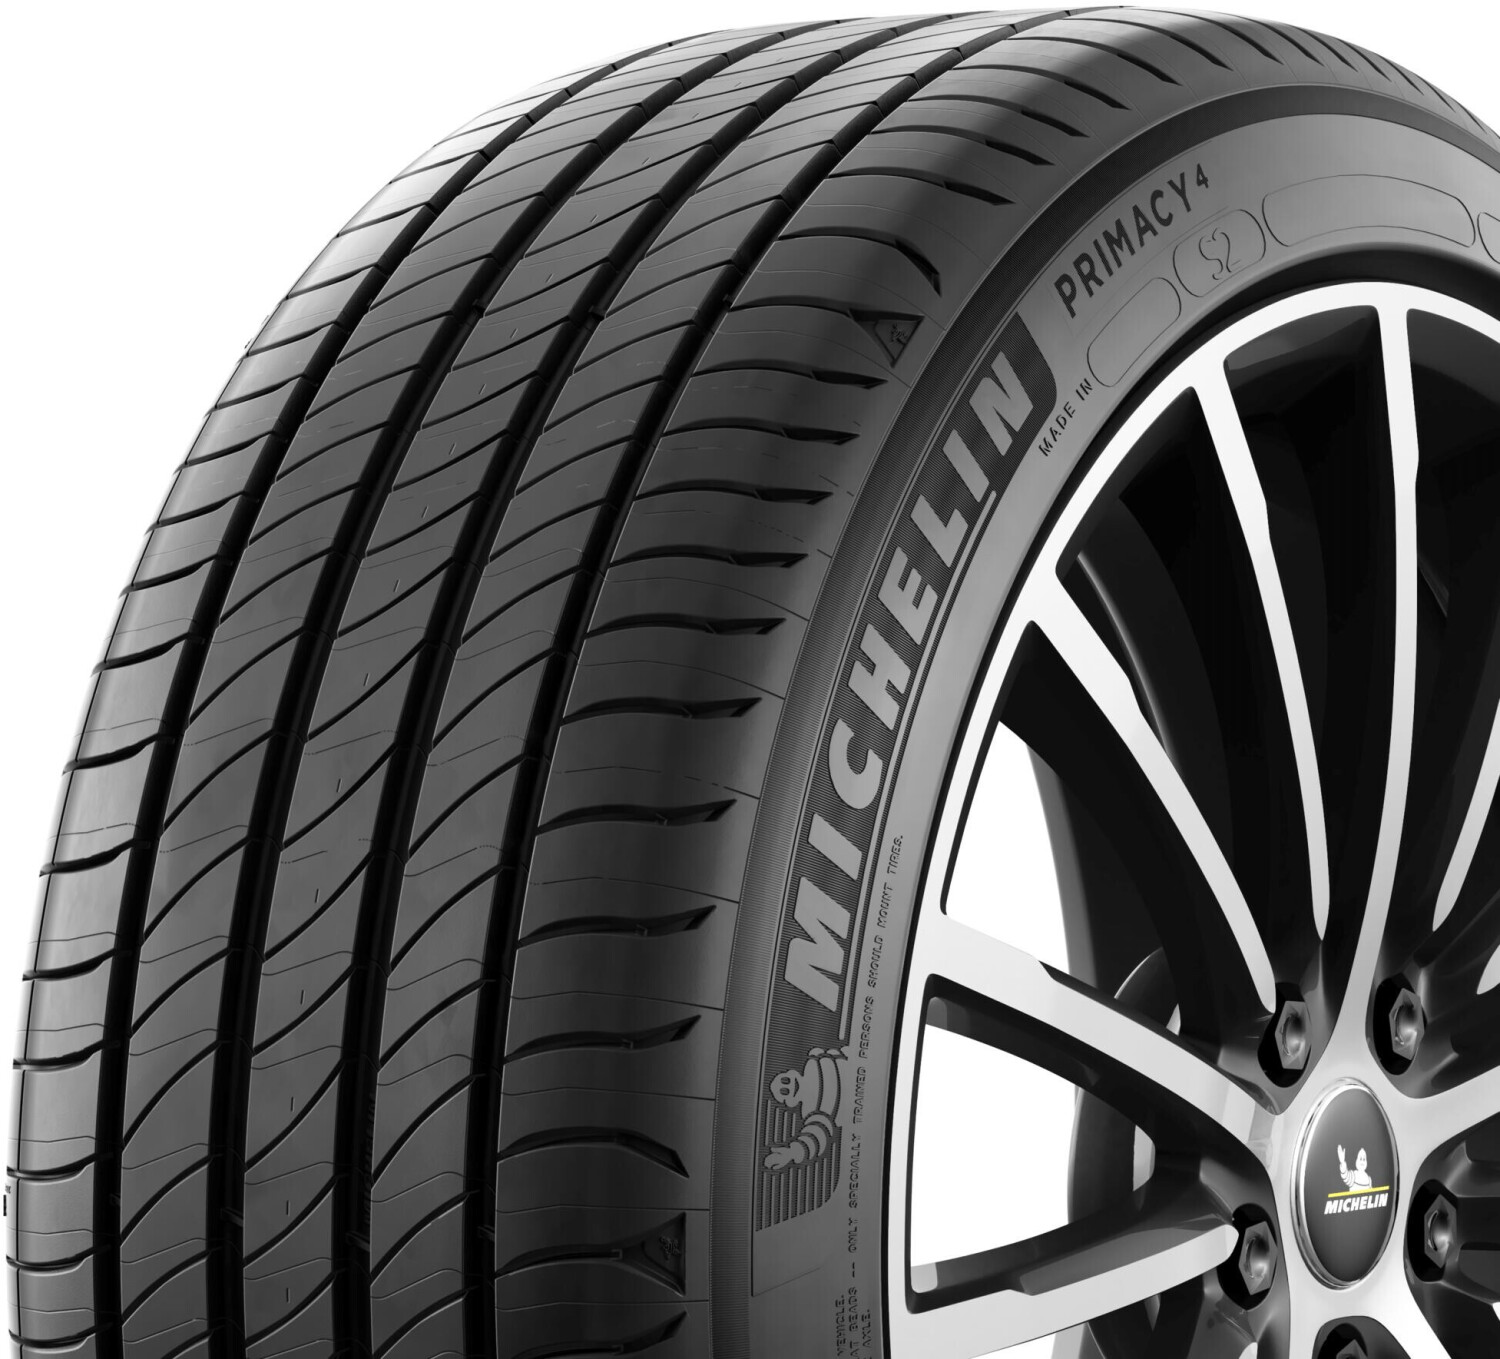 (Today) Michelin on S1 from Primacy 4 Deals 225/45 £108.51 XL – 94V Best R17 Buy